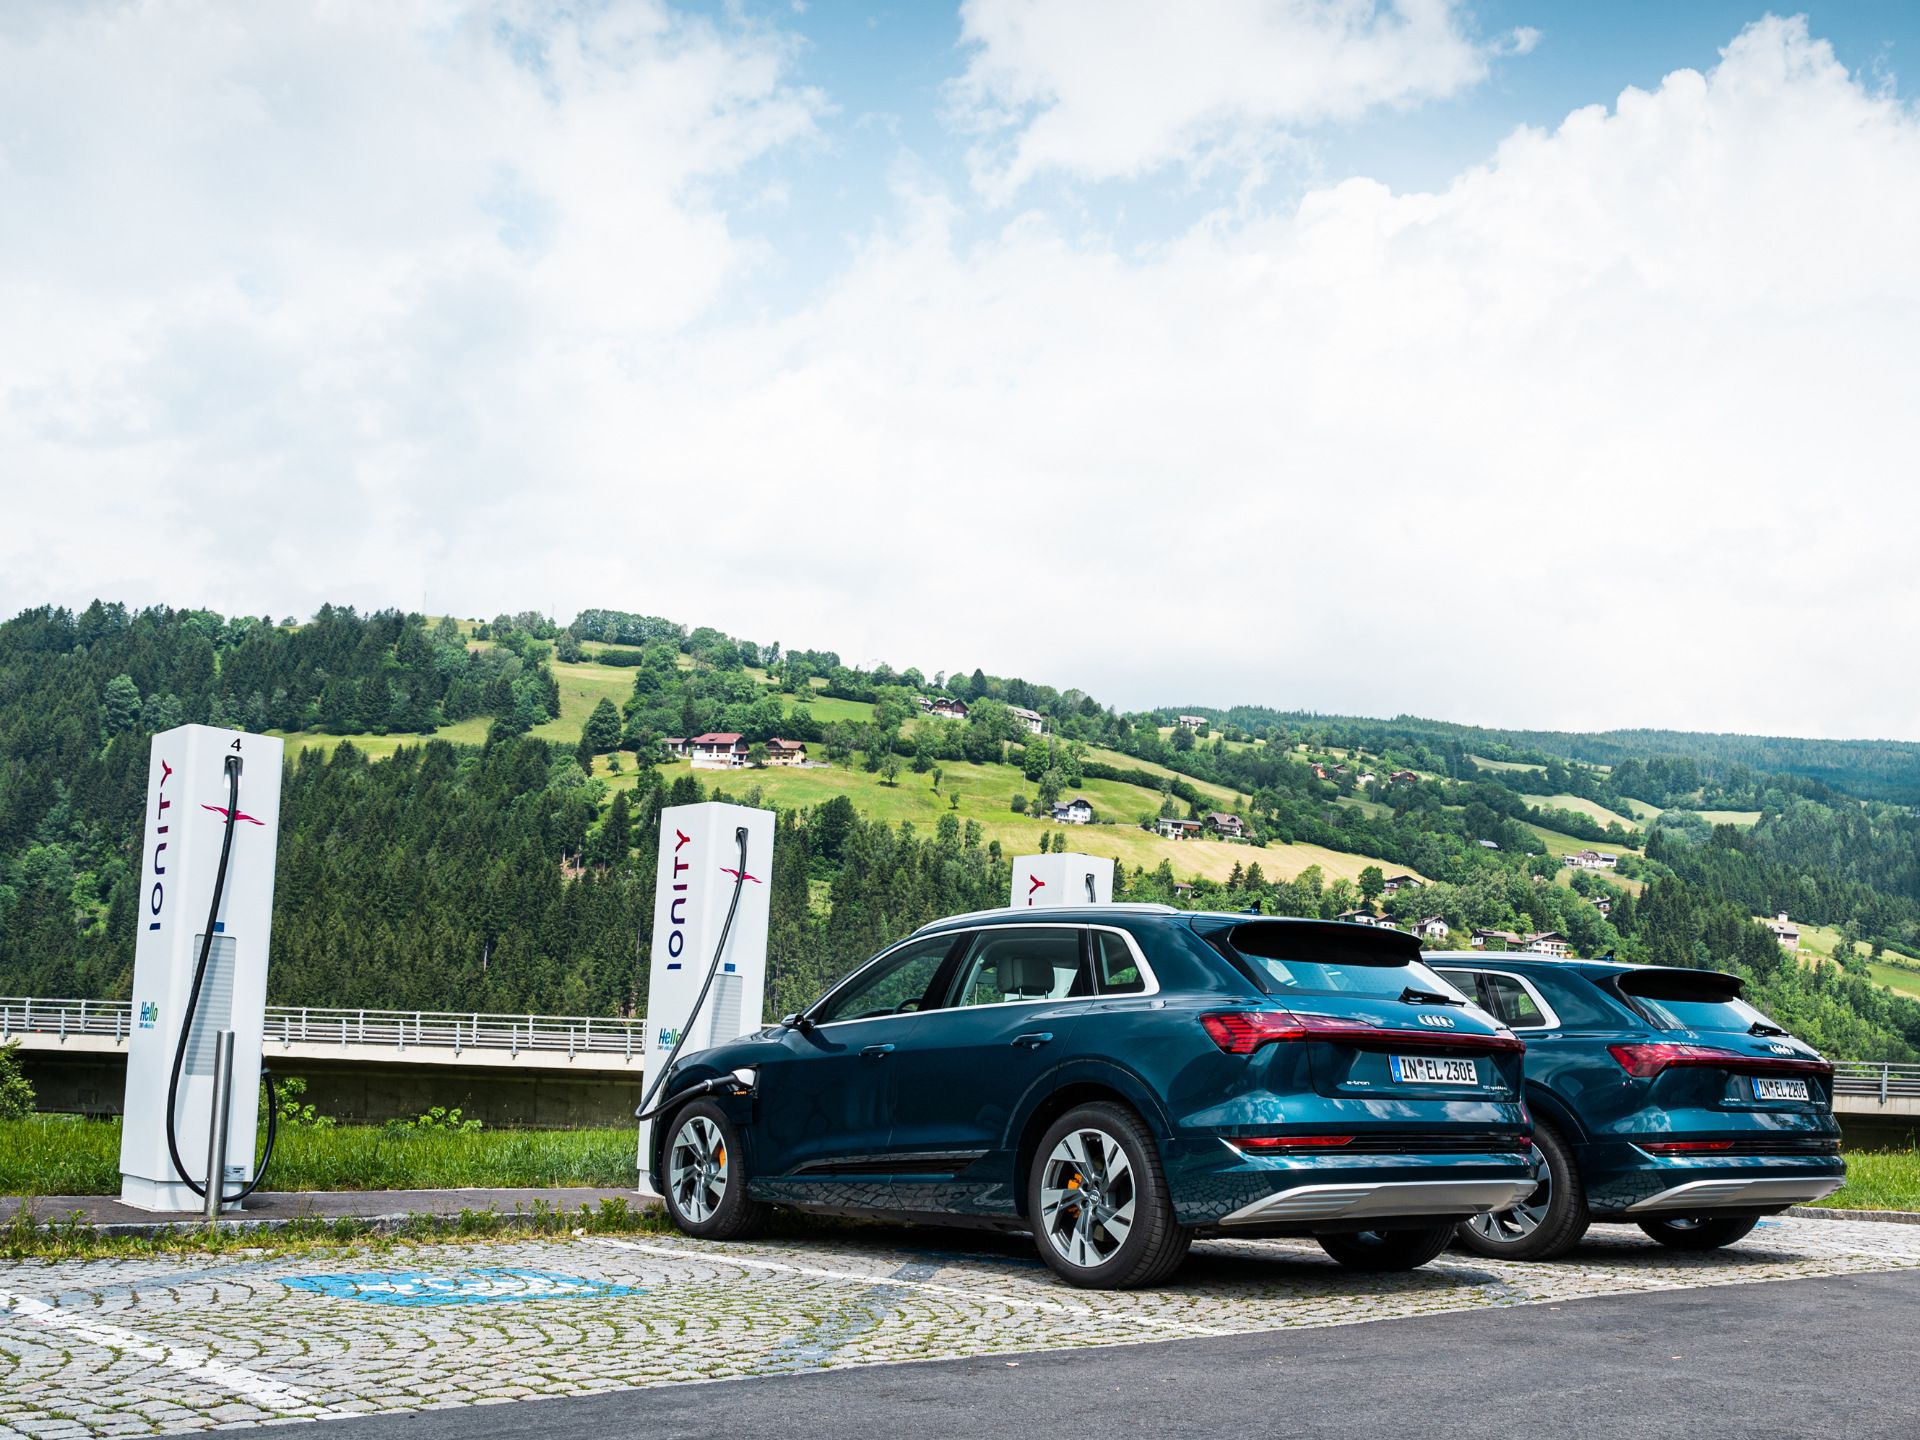 Three Audi e-trons at the IONITY quick-charging station.